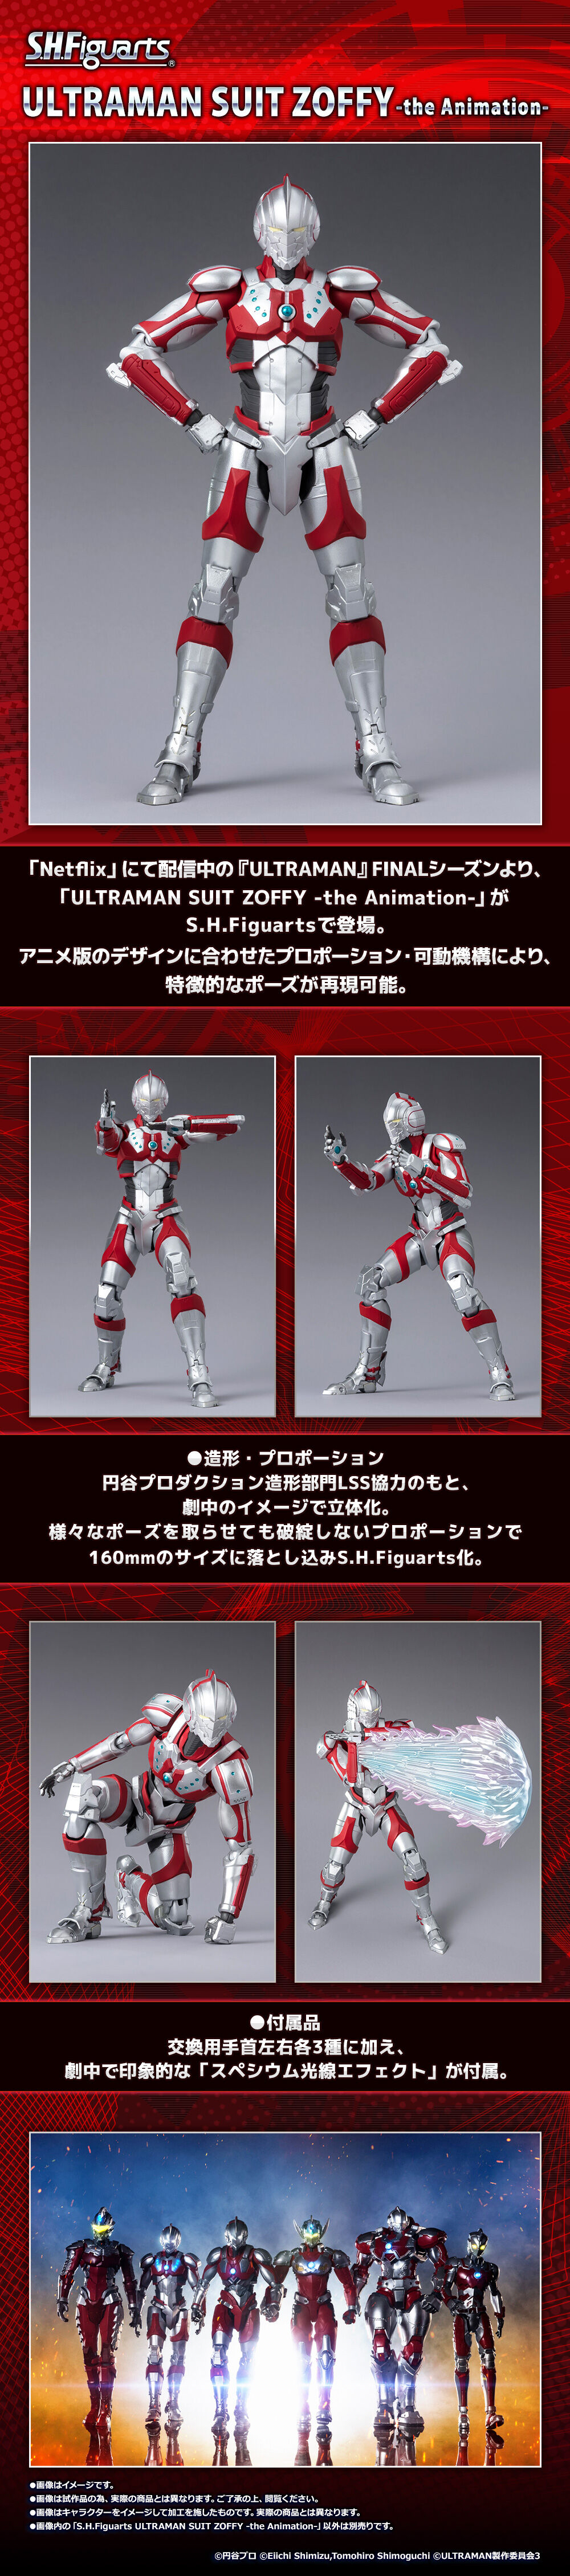 S.H.Figuarts ULTRAMAN SUIT ZOFFY -the Animation- Action Figure